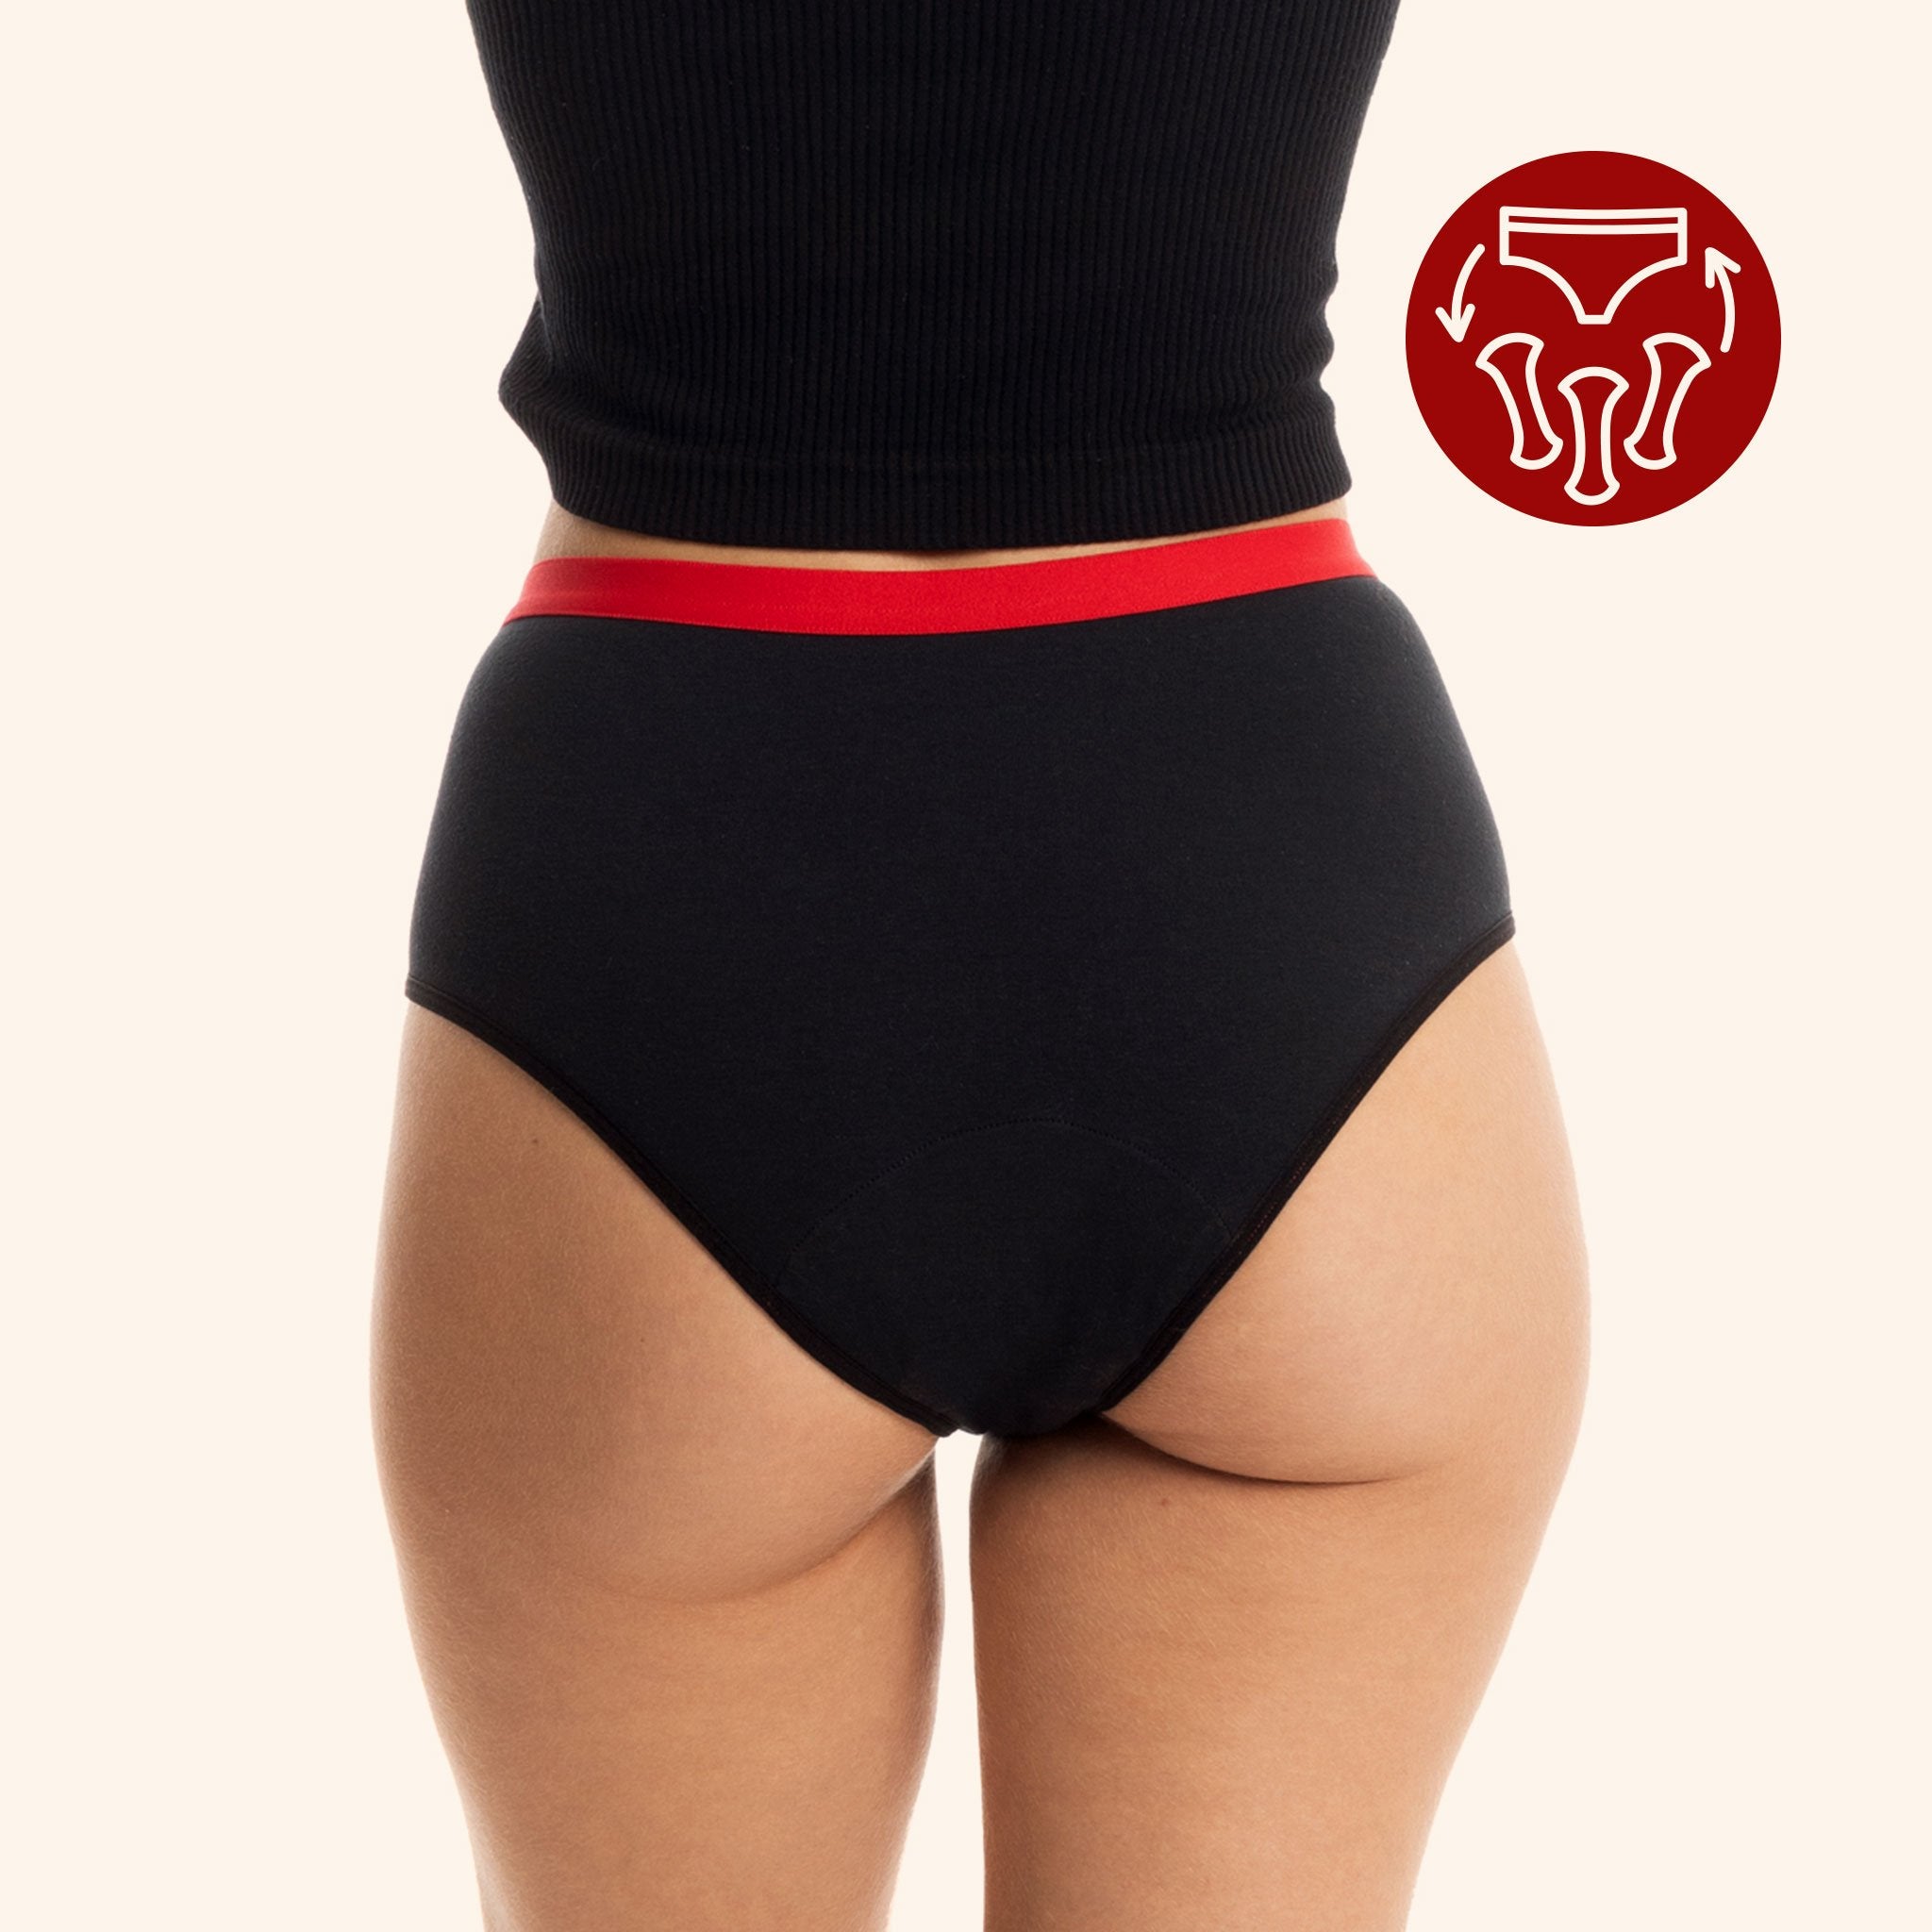 Fashion (Skin)New High Waist Thermal Panties For Women Flat Belly Shaping Panties  Seamless Boxer Safety Shorts Period Menstrual Underwear Lady SCH